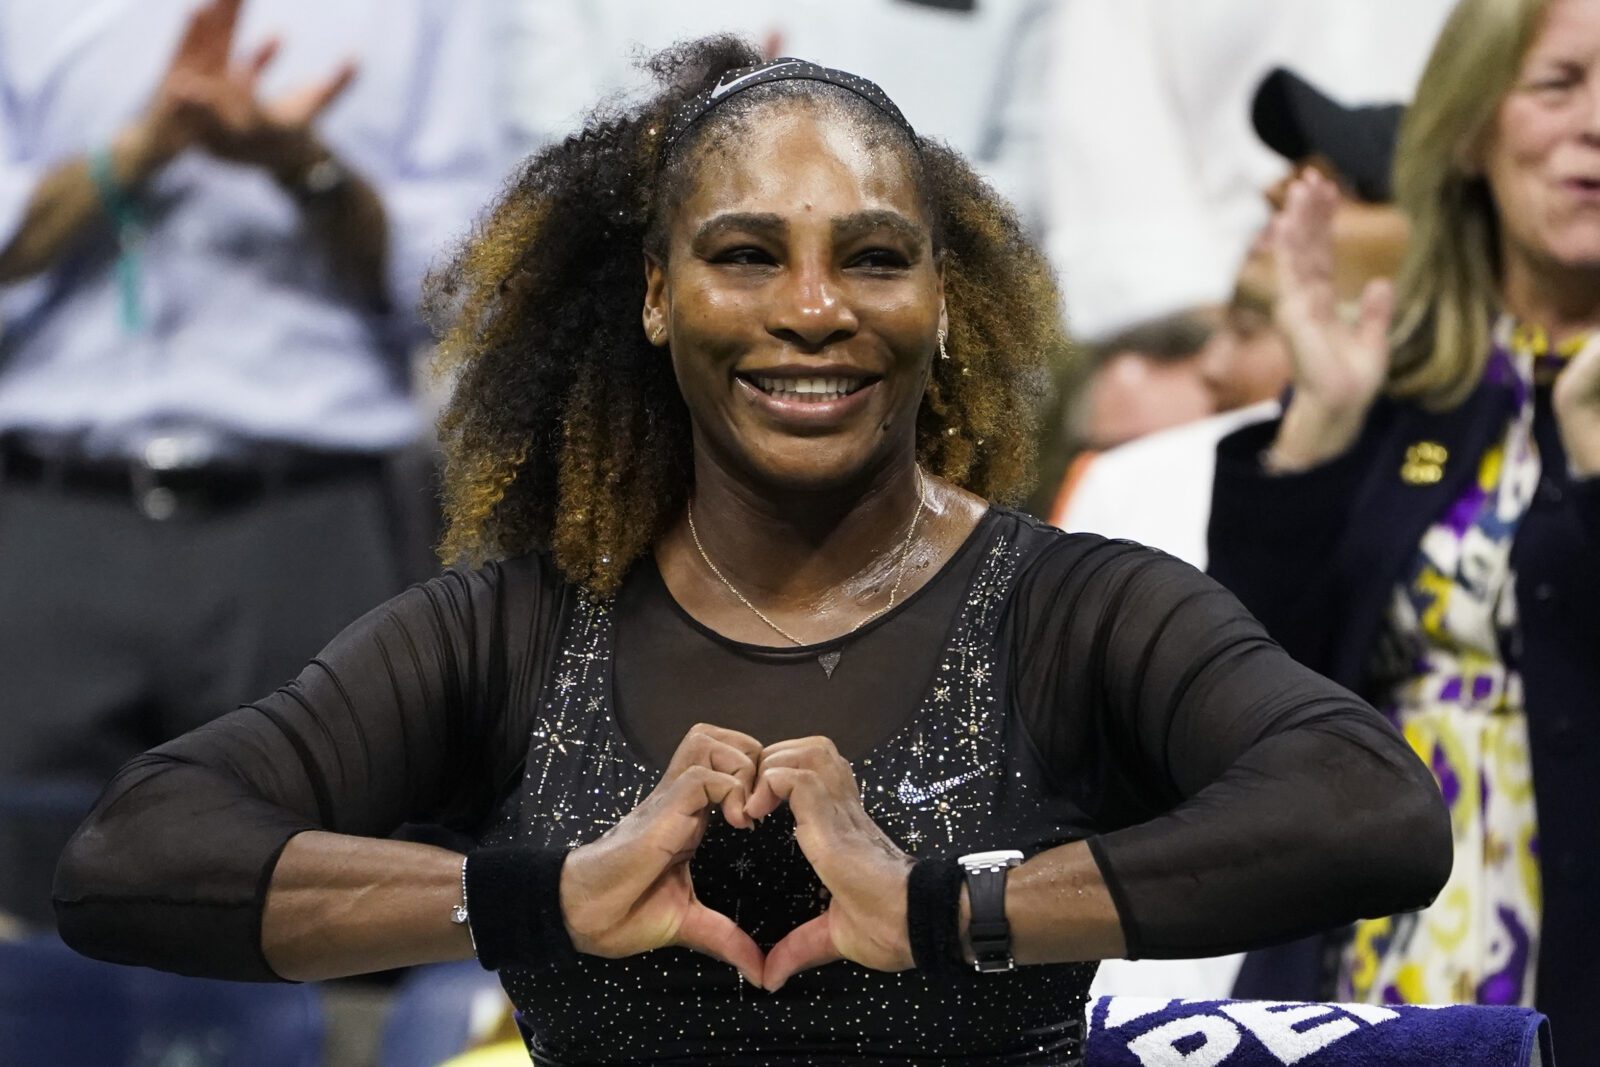 Serena Williams' US Open 2022 outfit is highly symbolic